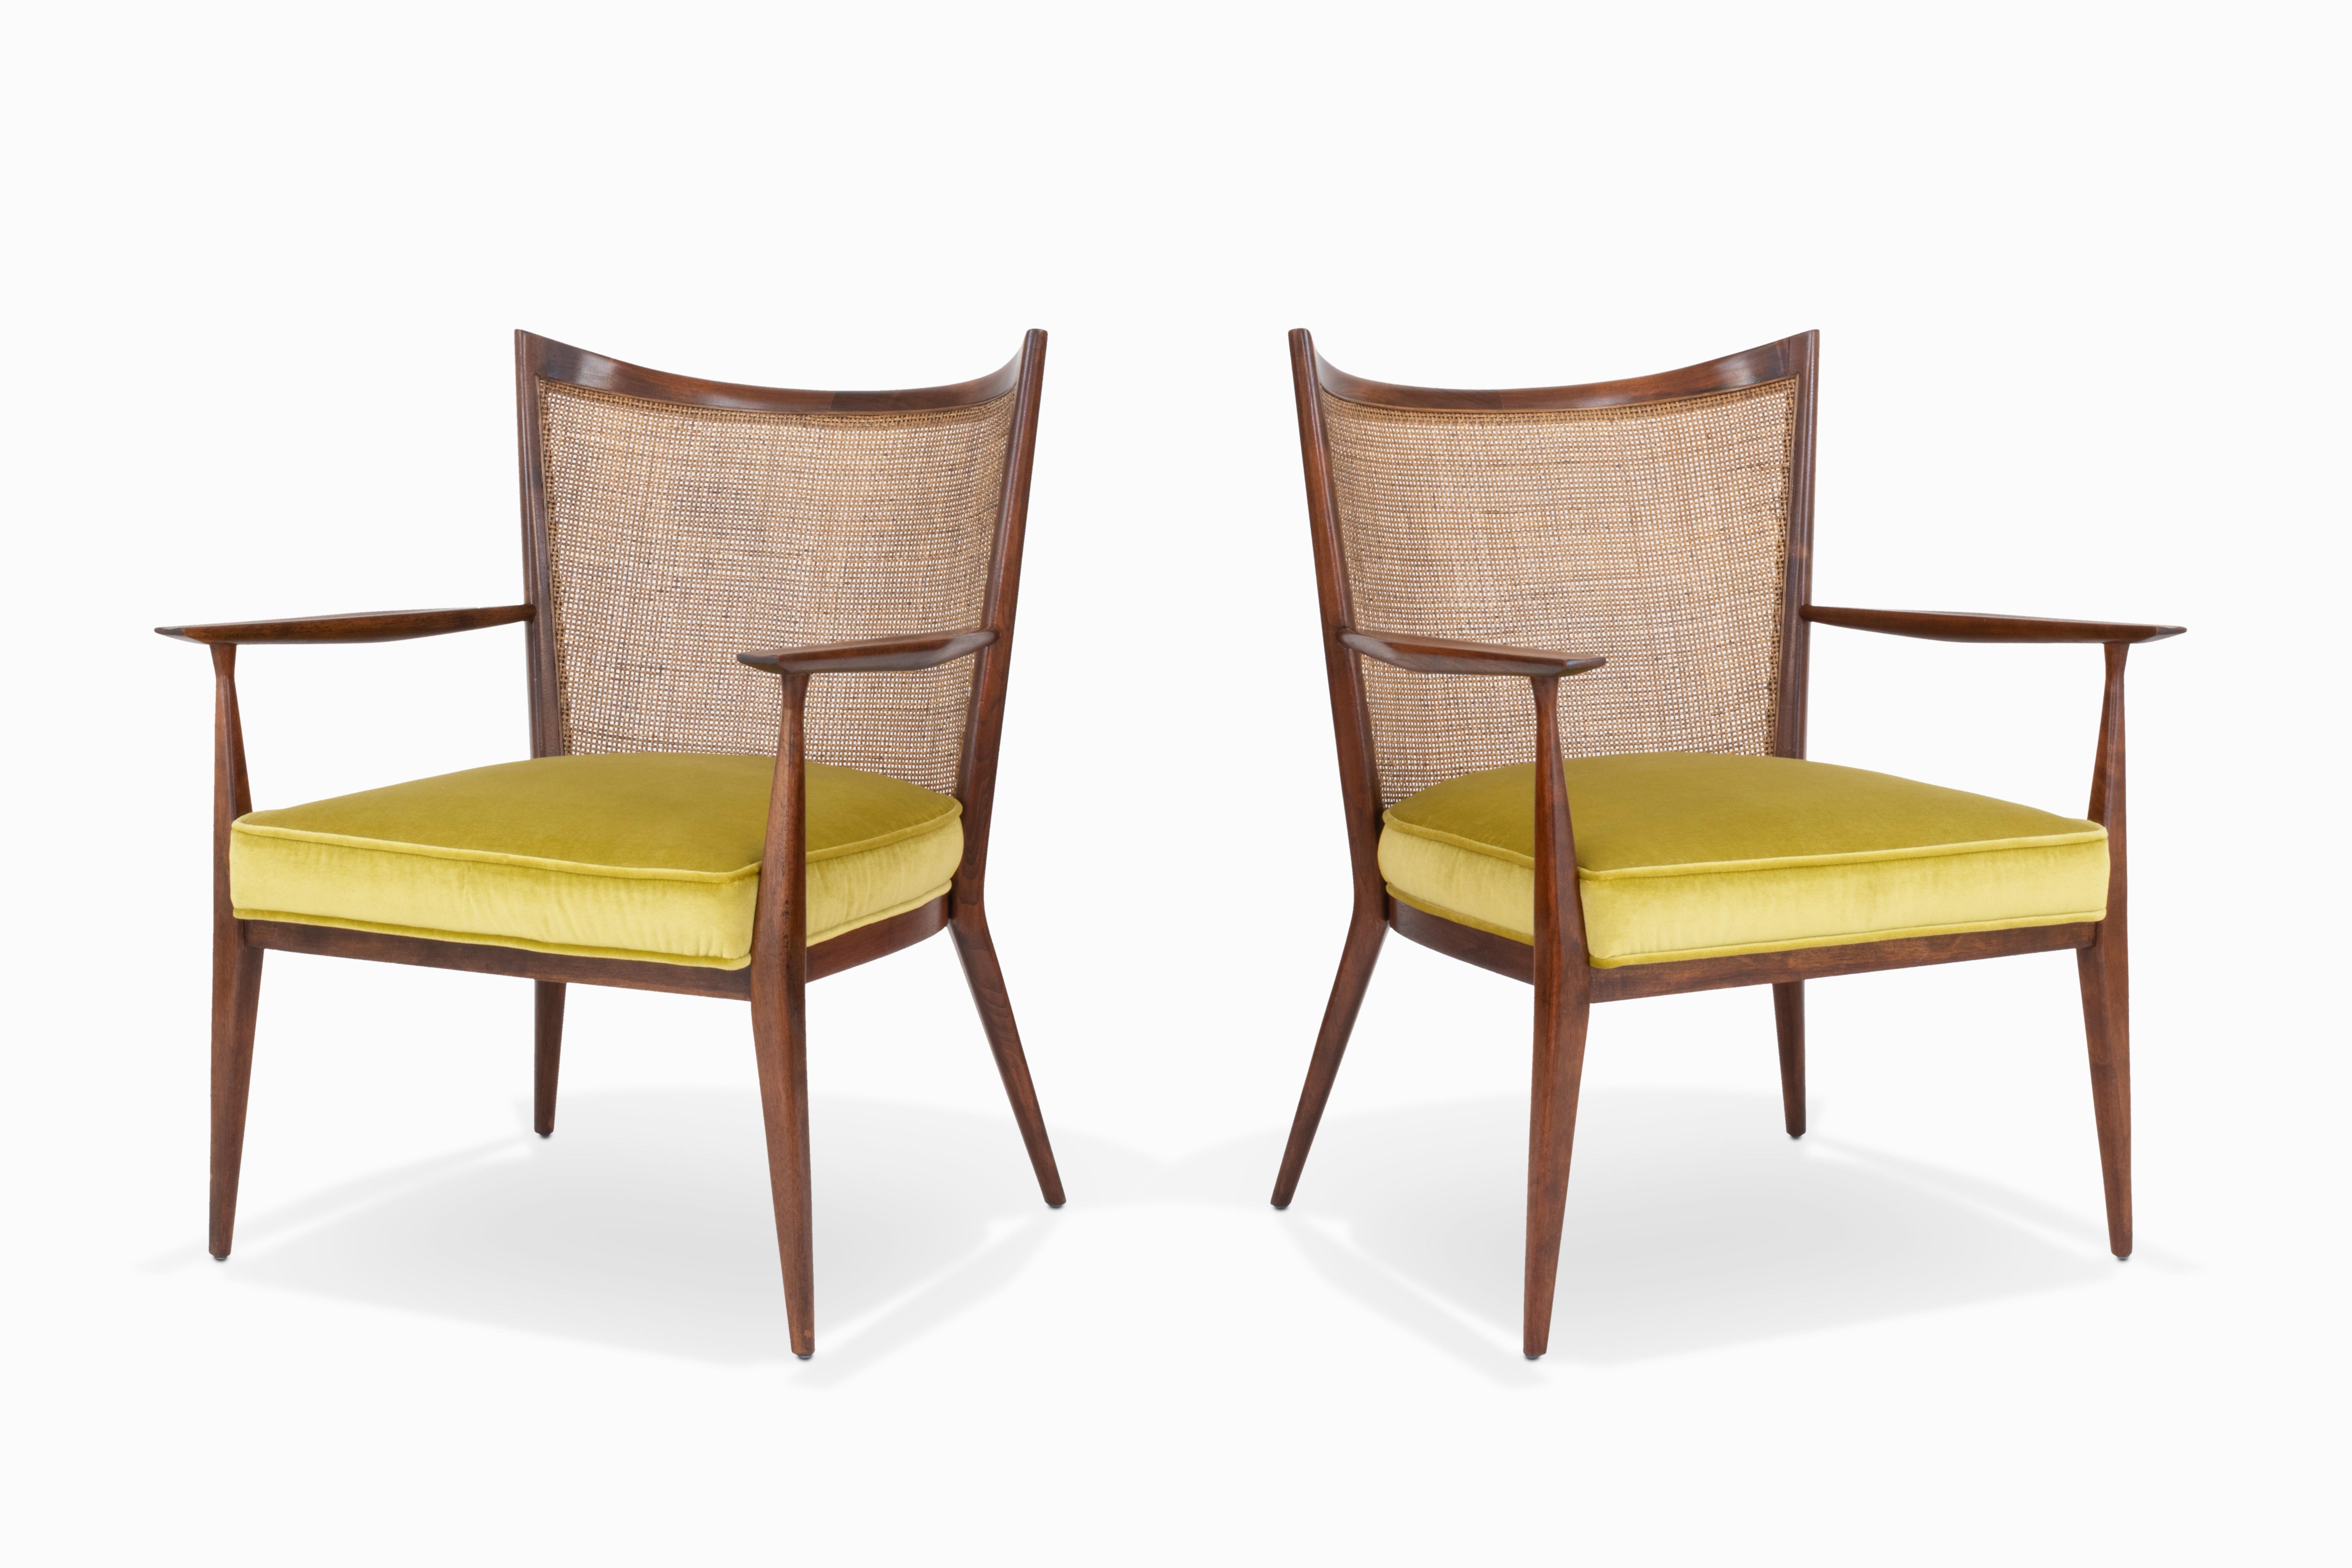 Here is a gorgeous pair of cane back lounge chairs designed by Paul McCobb for Directional. The frames and caning are in original condition accompanied by newly upholstered seat cushions in a lovely chartreuse velvet. These beautiful chairs feature